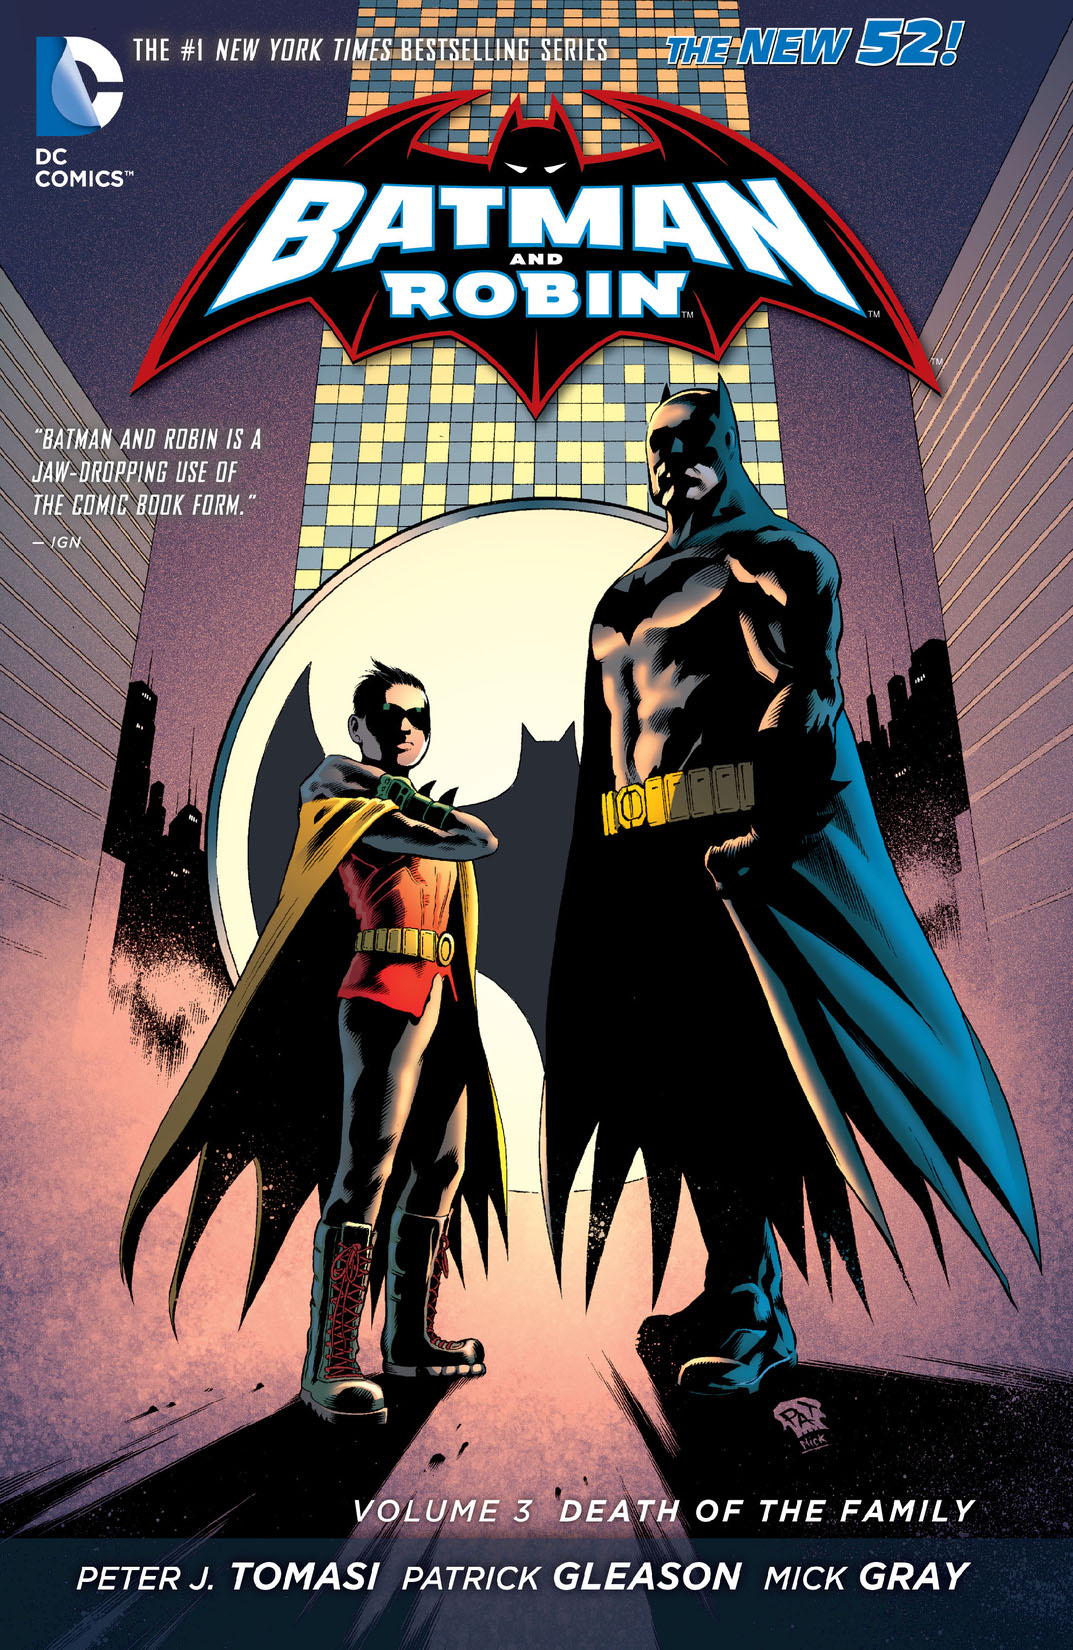 Batman and Robin Vol. 3: Death of the Family preview images